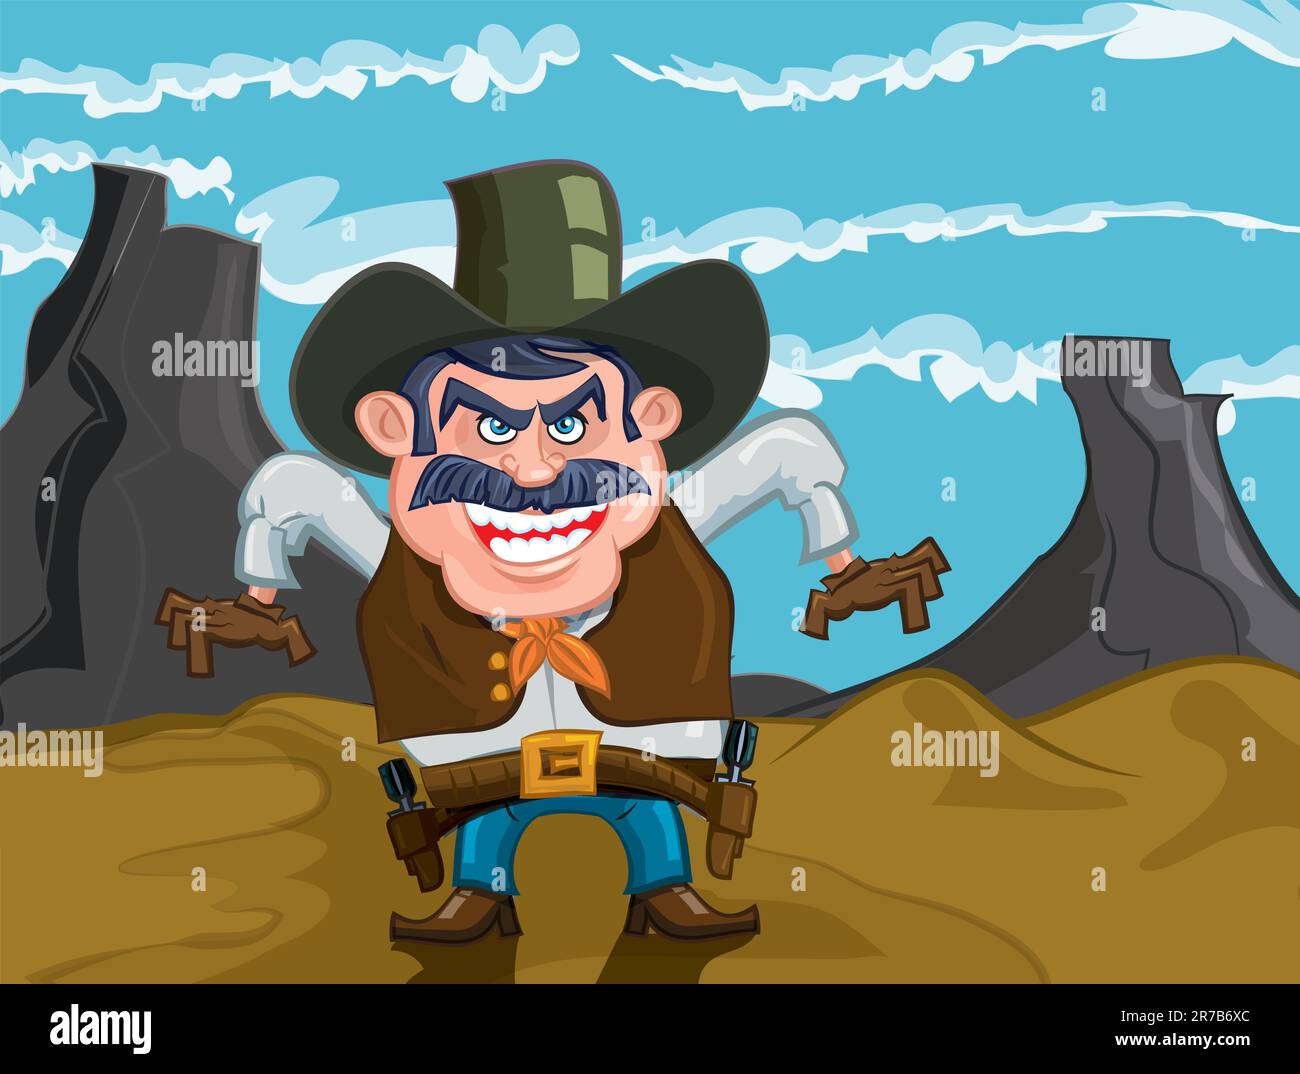 Cartoon cowboy with an evil smile. He is standing in the desert Stock Vector